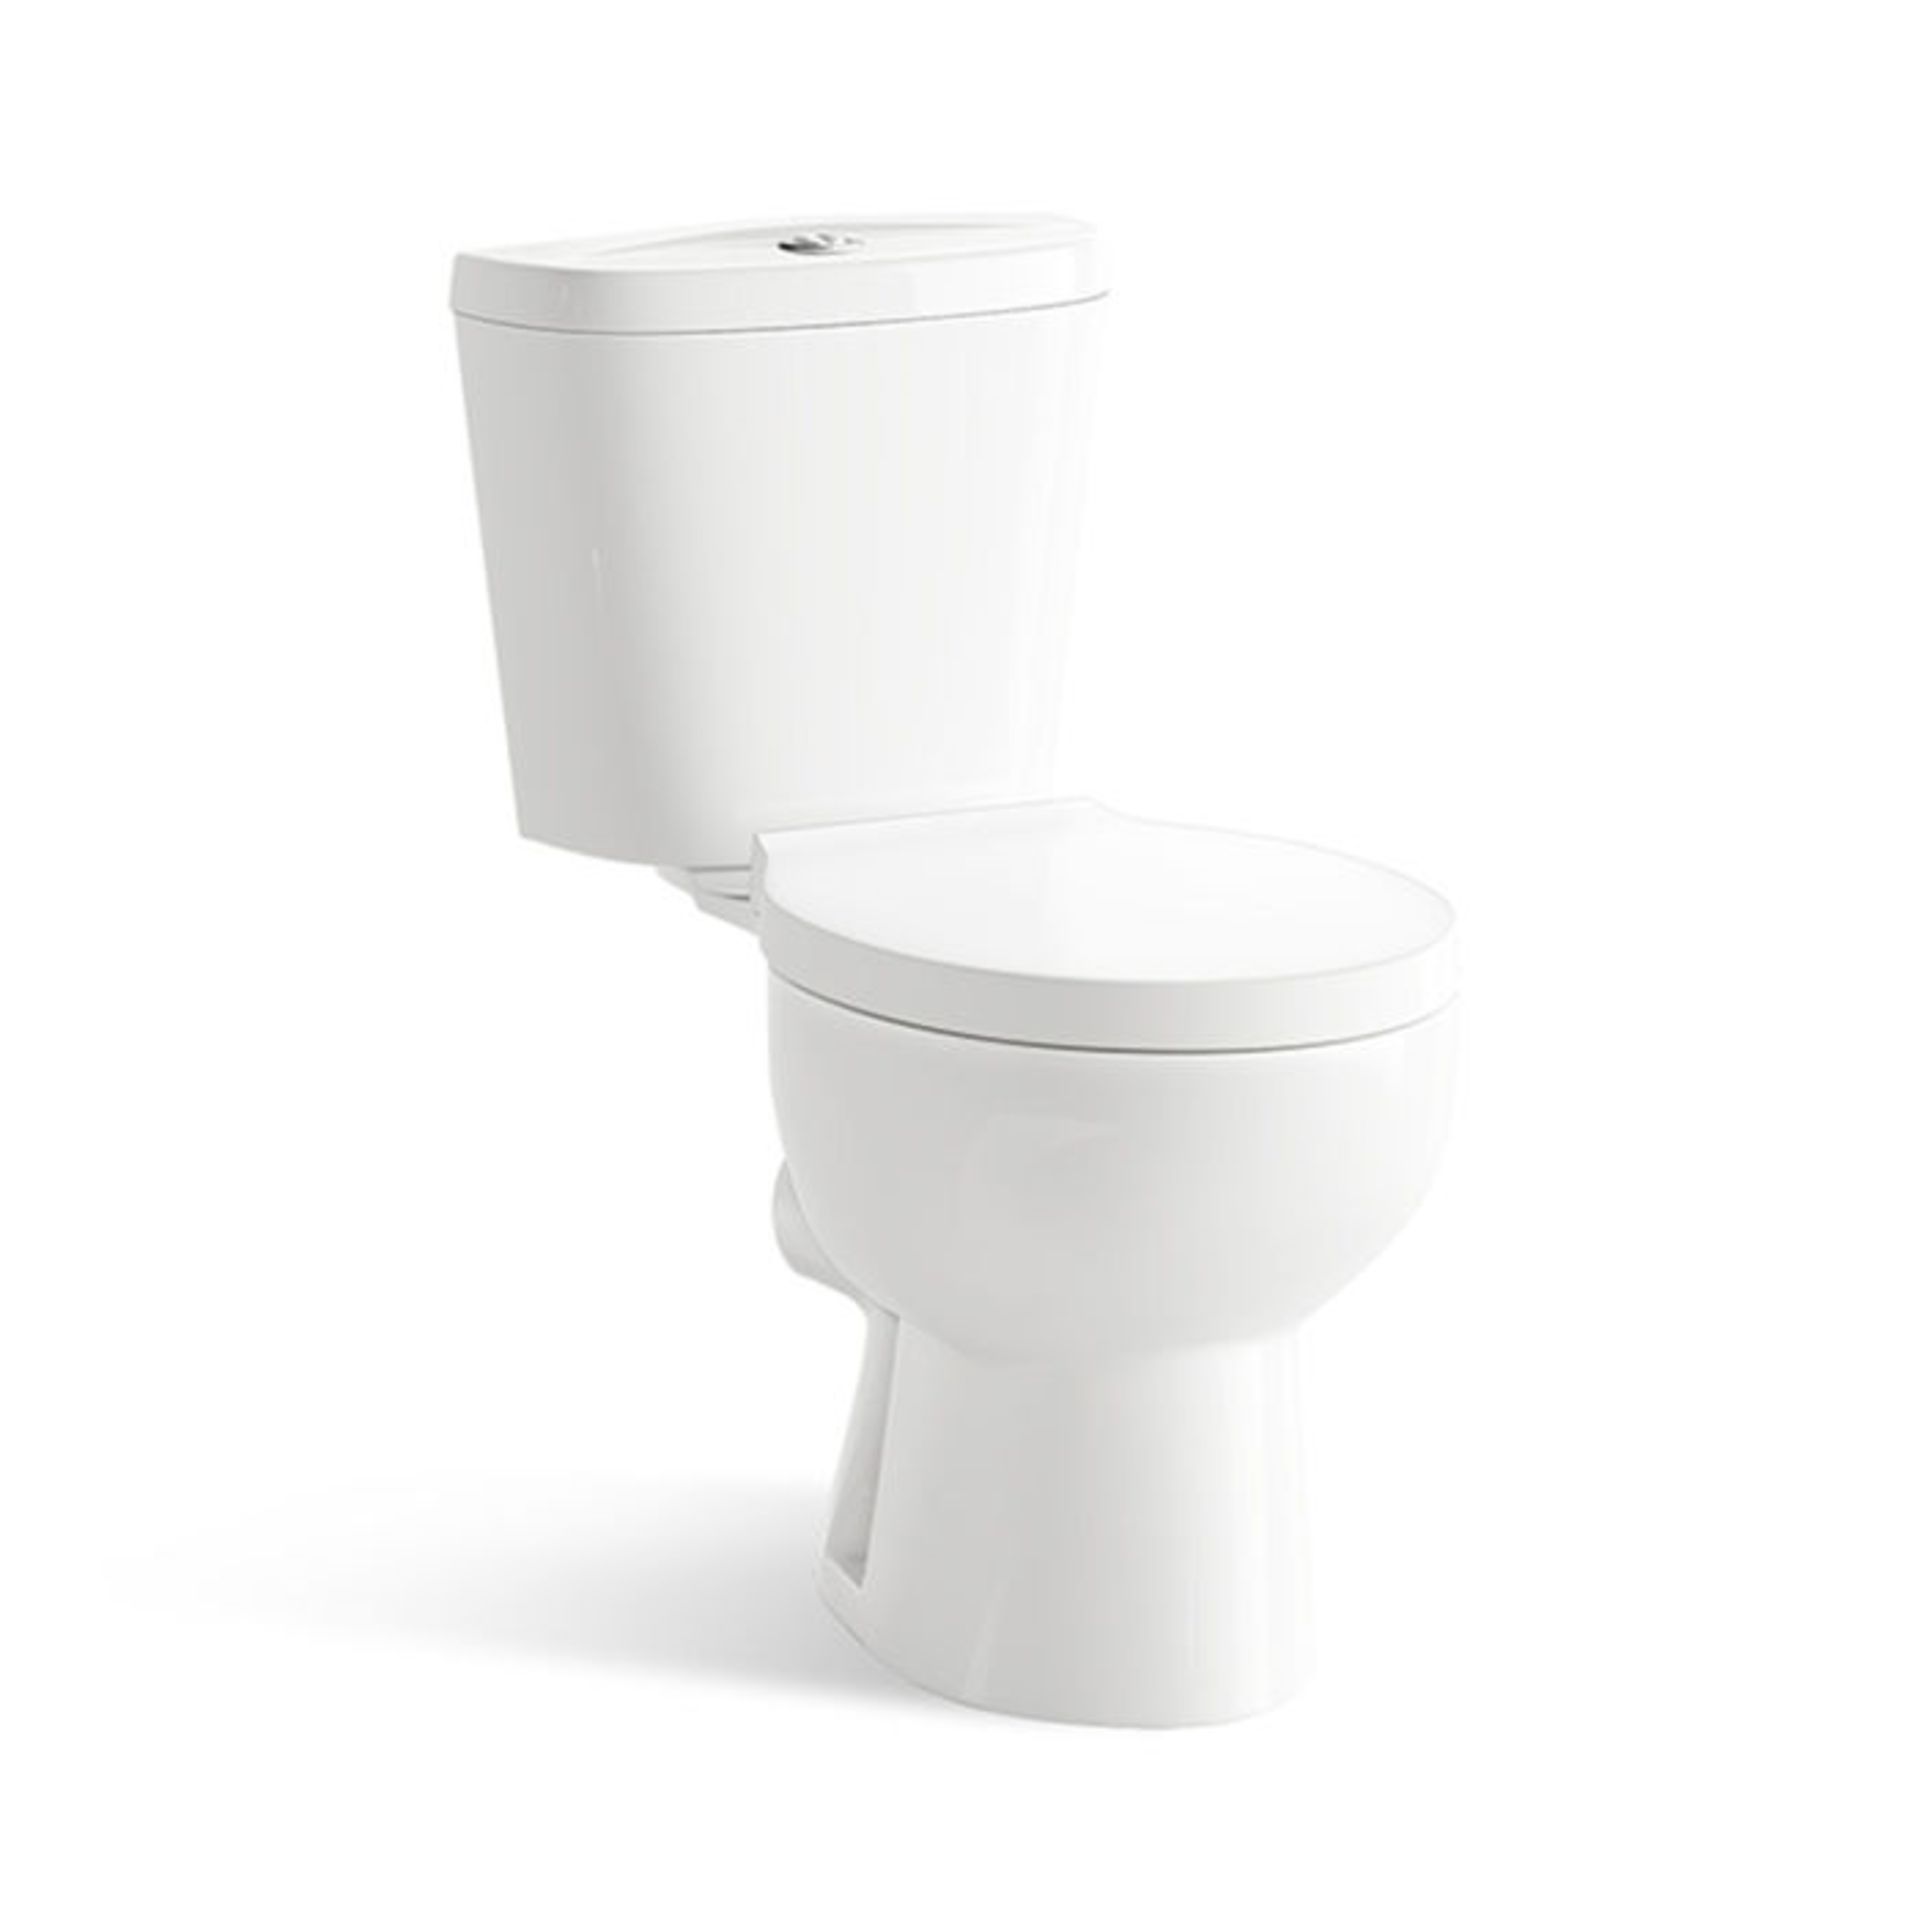 (SA14) Quartz Close Coupled Toilet. We love this because it is simply great value! Made from White